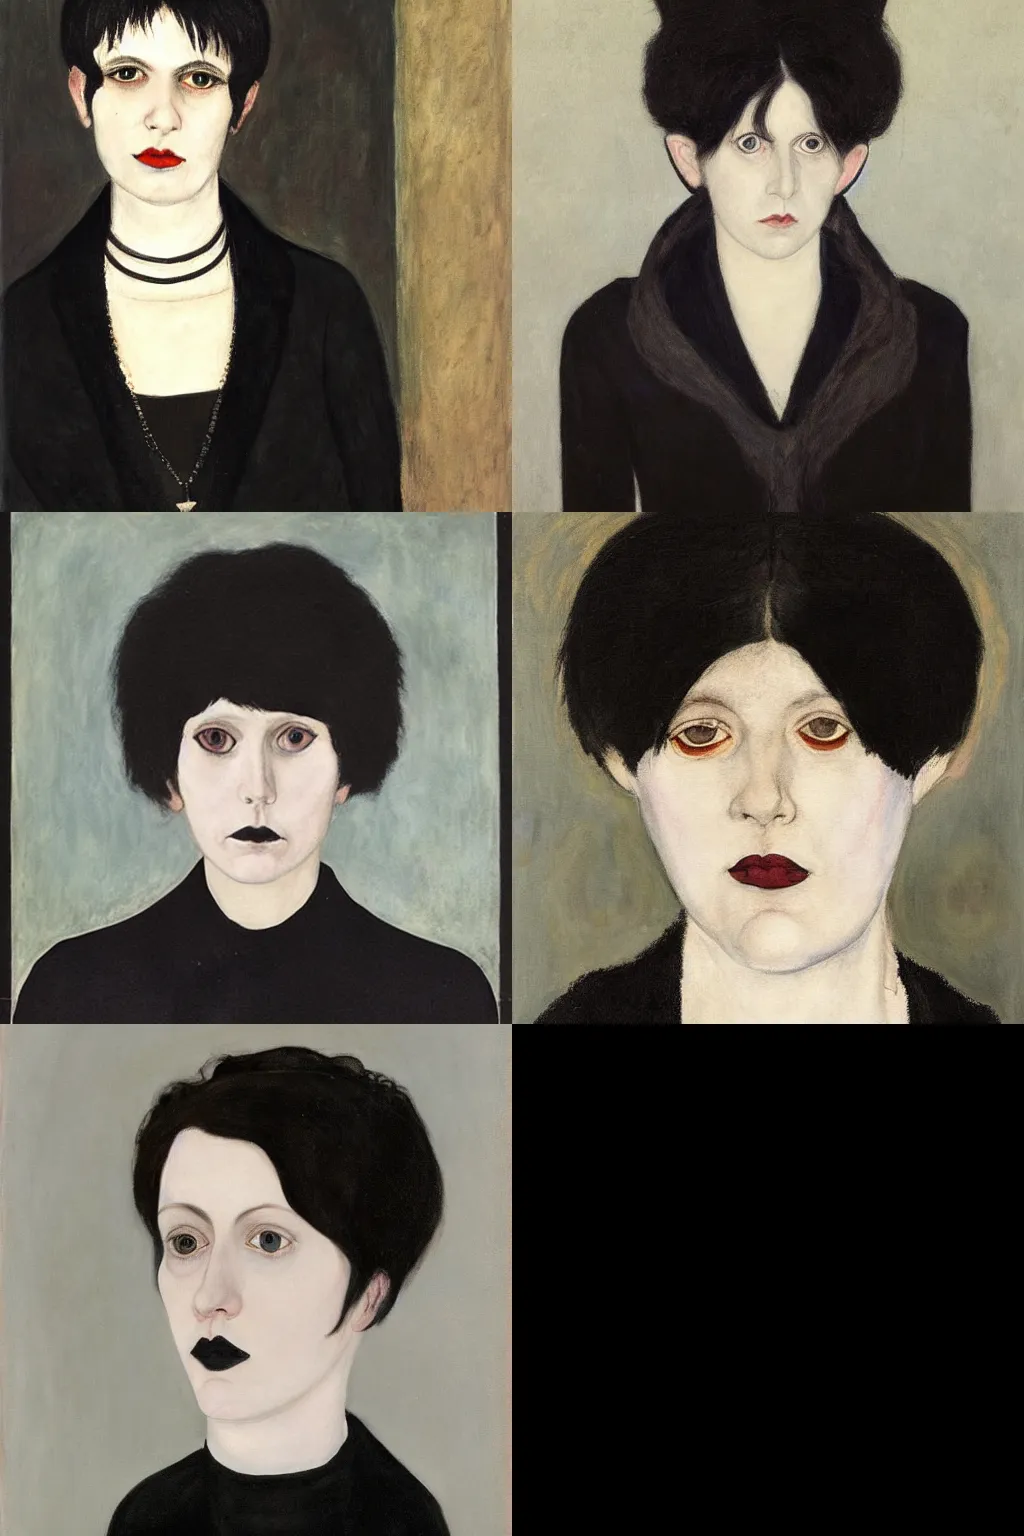 Prompt: a goth portrait painted by hilma af klint. her hair is dark brown and cut into a short, messy pixie cut. she has a slightly rounded face, with a pointed chin, large entirely - black eyes, and a small nose. she is wearing a black tank top, a black leather jacket, a black knee - length skirt, and a black choker.